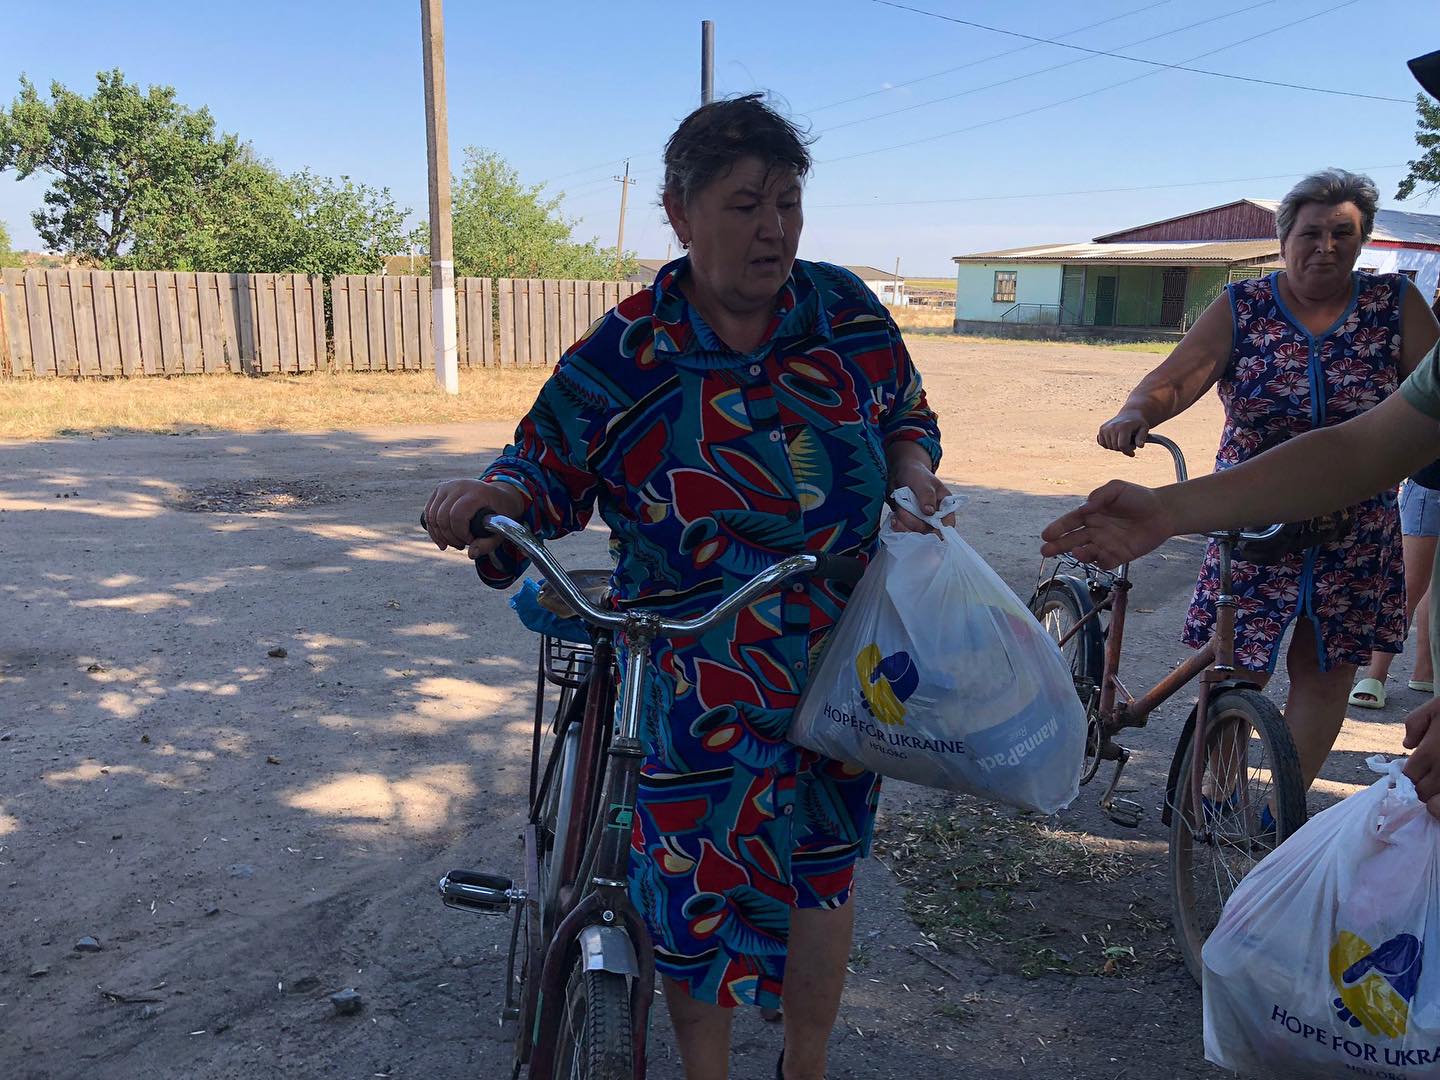 A woman is standing next to a man on a bike.